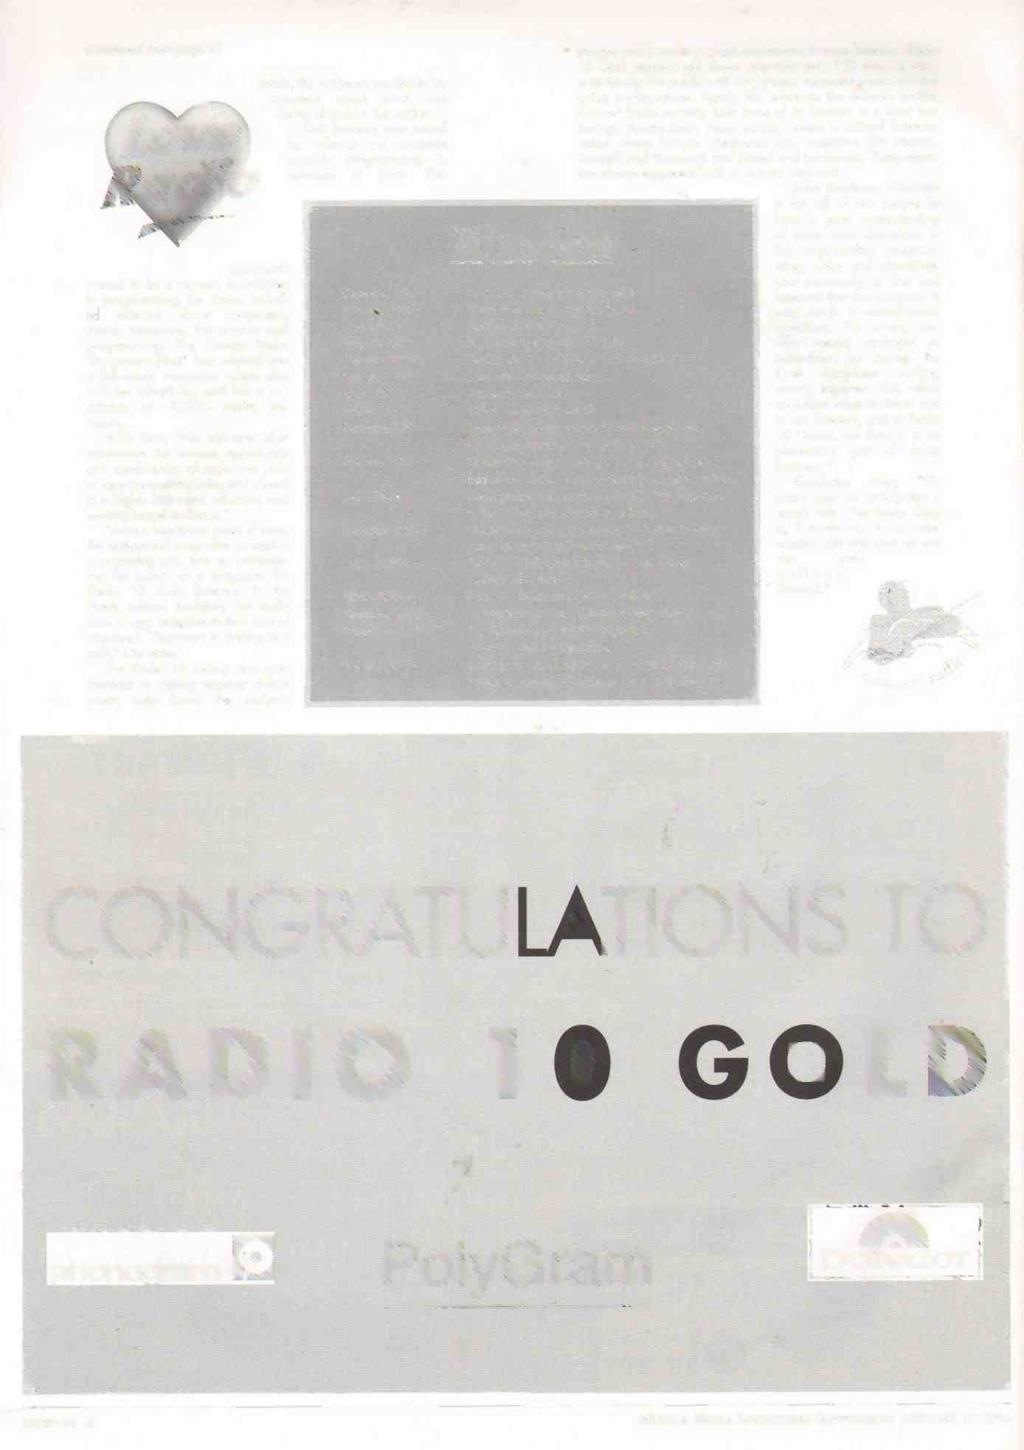 (continued from page 4) Love Radio approach proved to be a success. In addition to programming, the station included editorial about composers, events, musicians, the product and programming.